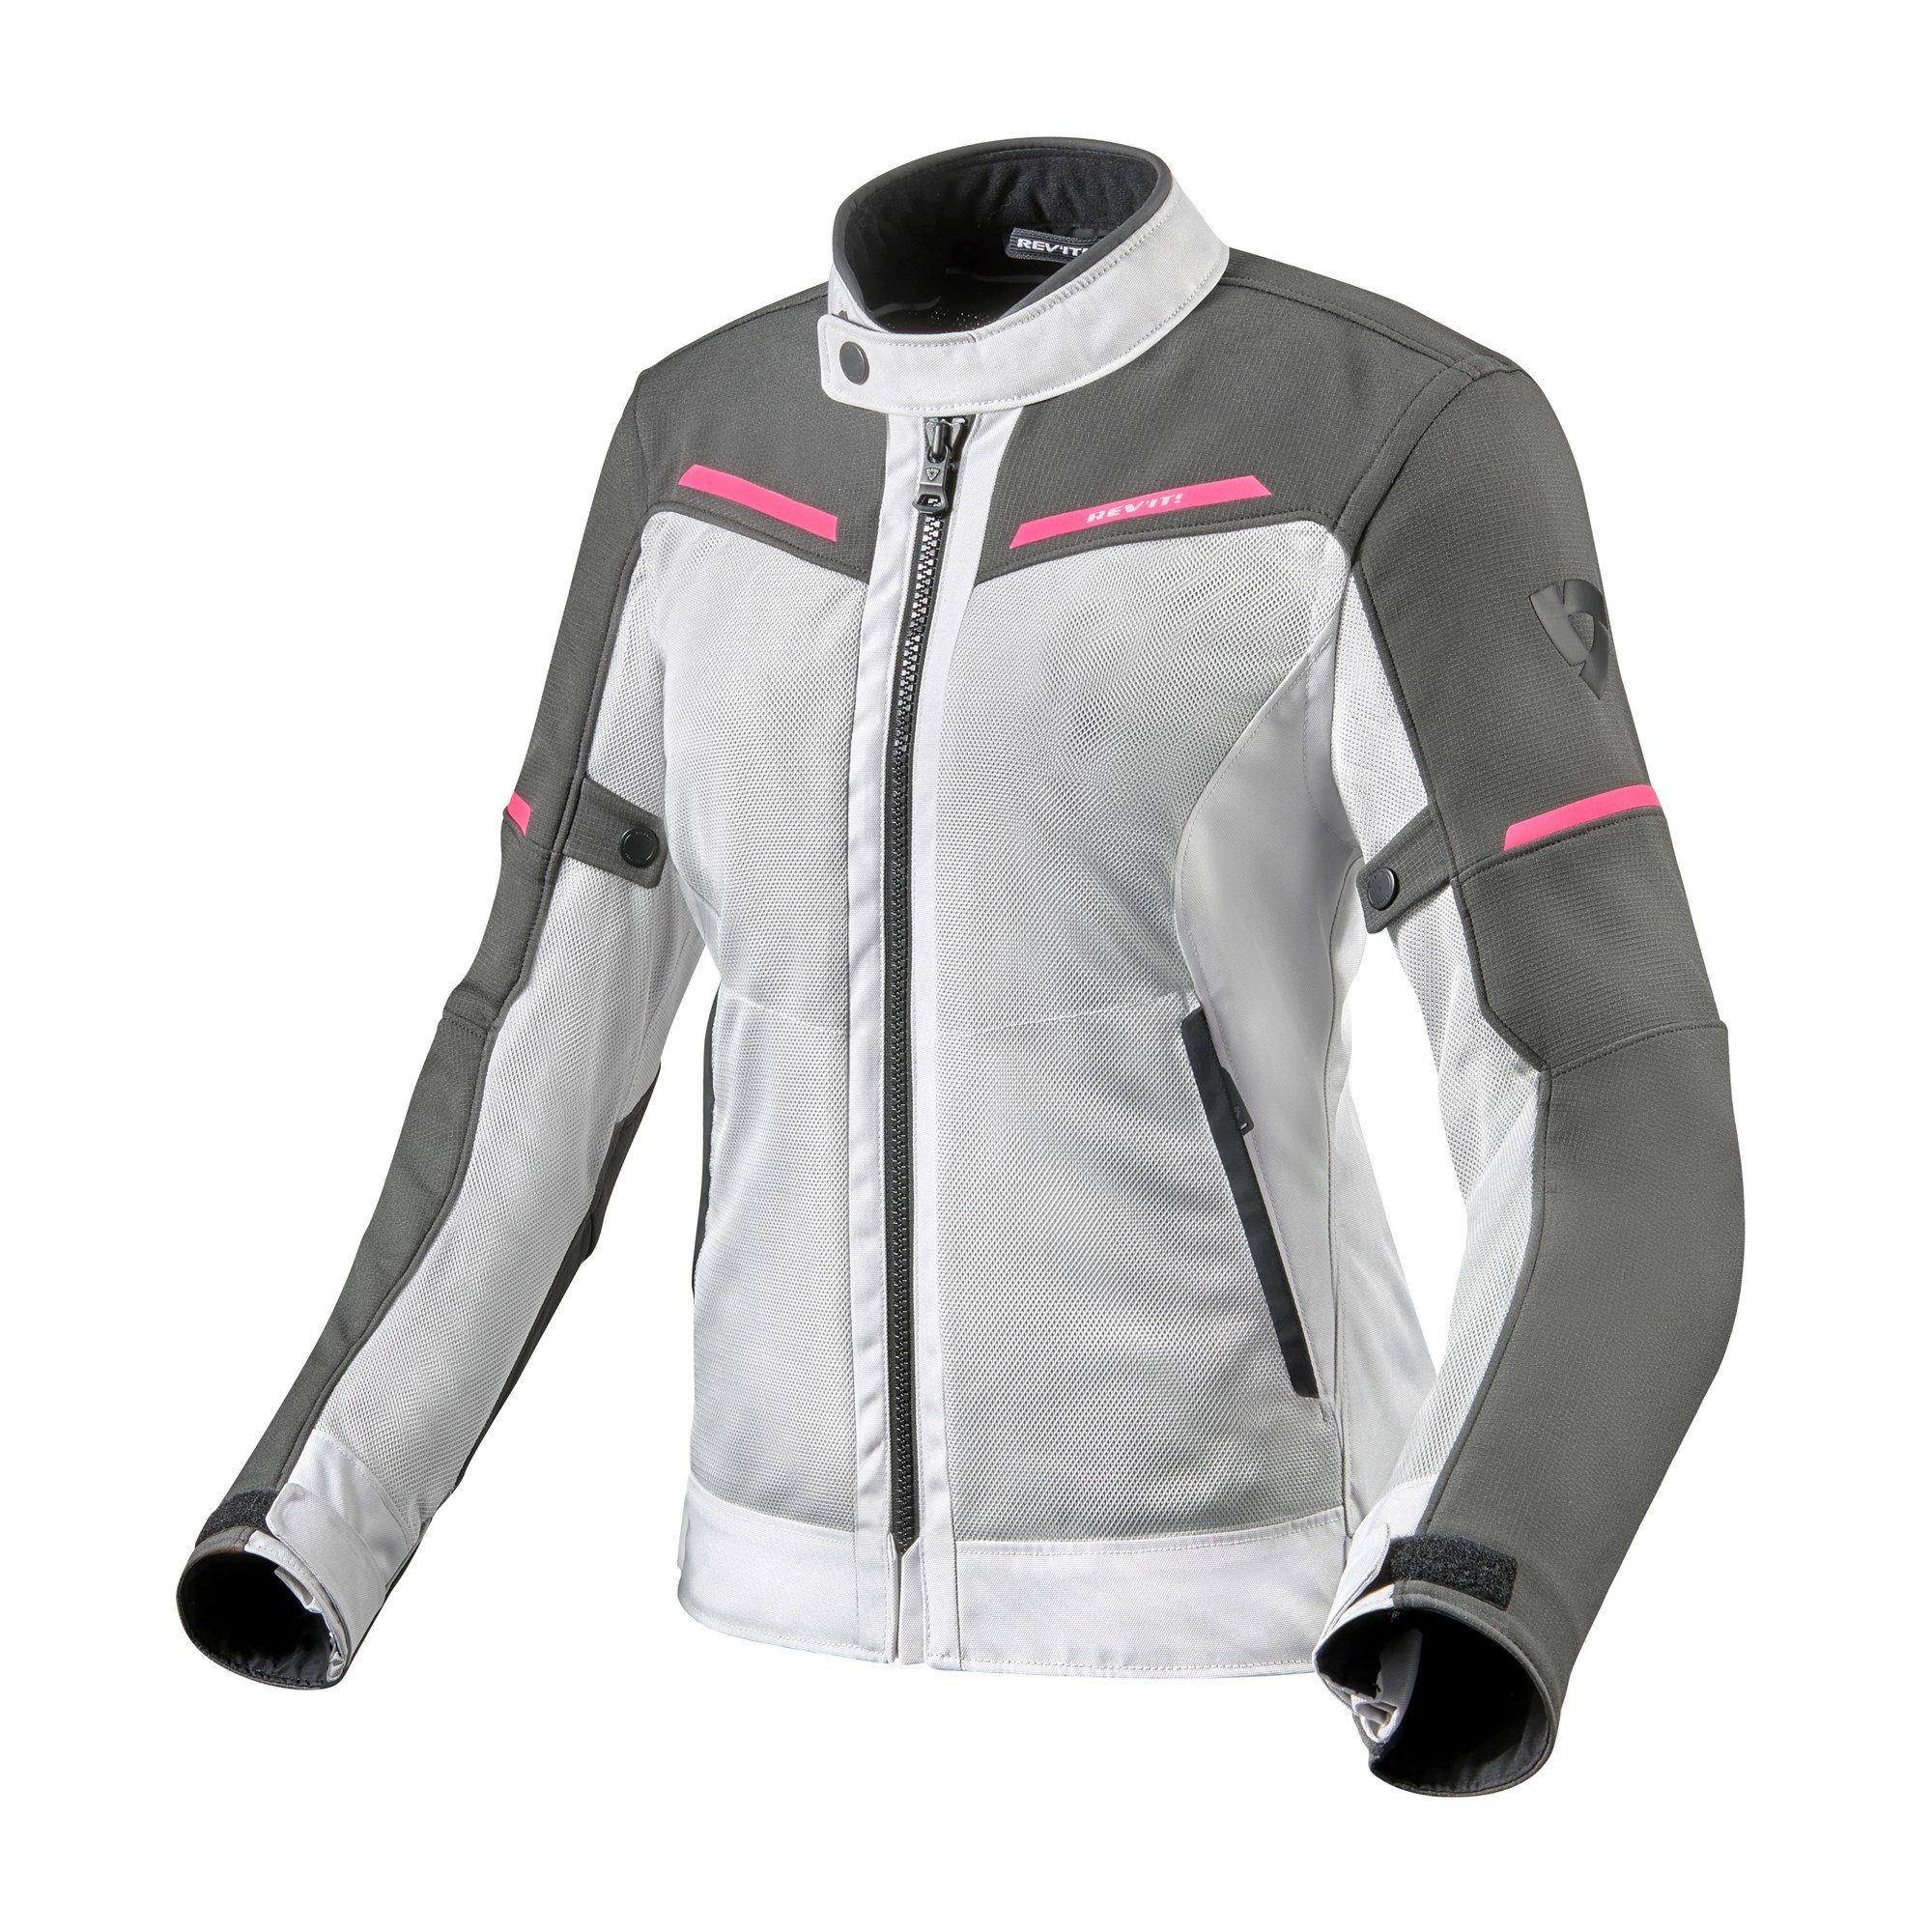 Image of REV'IT! Airwave 3 Jacket Lady Silver Pink Size 34 ID 8700001281393